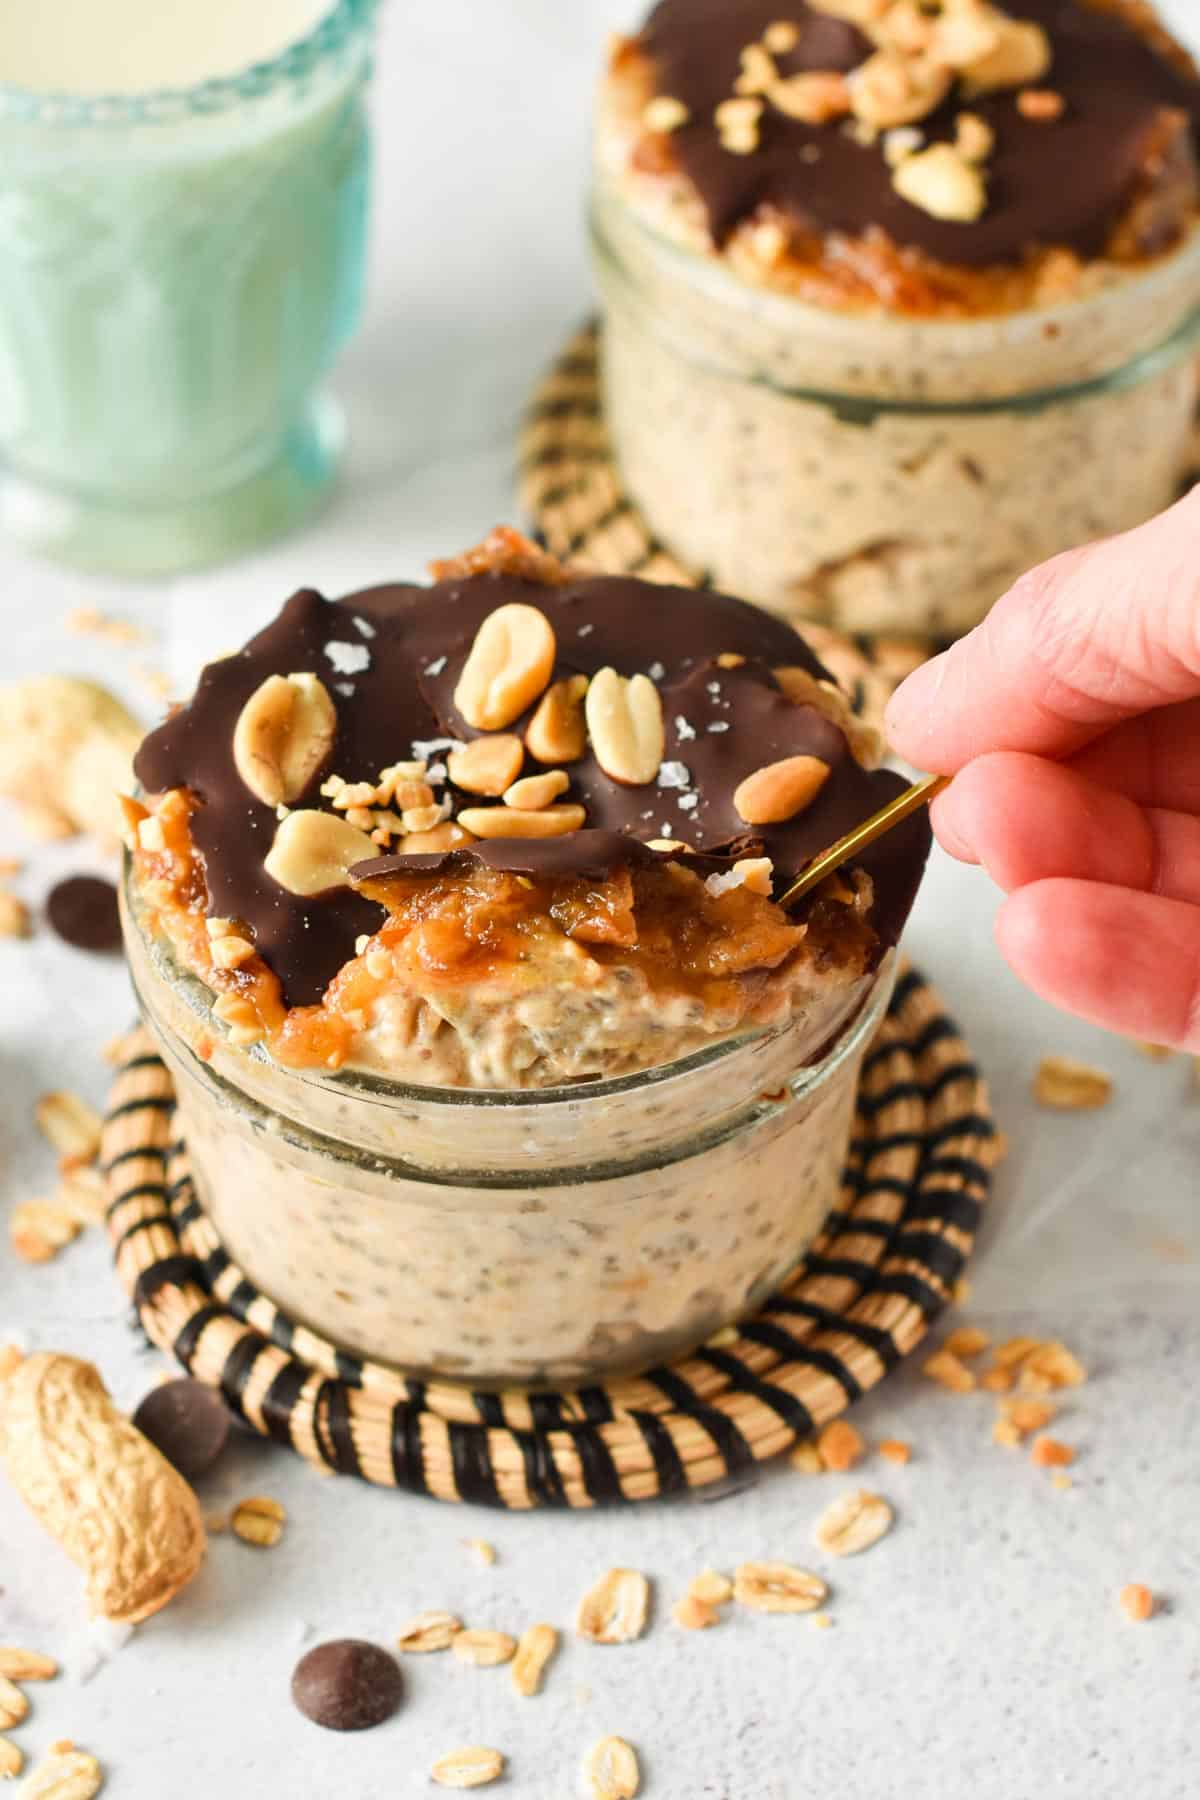 These Snickers Overnight are easy healthy breakfast with the most delicious snickers bars flavors. They are naturally bringing all snickers' flavors using wholesome ingredients like dates, peanut butter and dark chocolate.